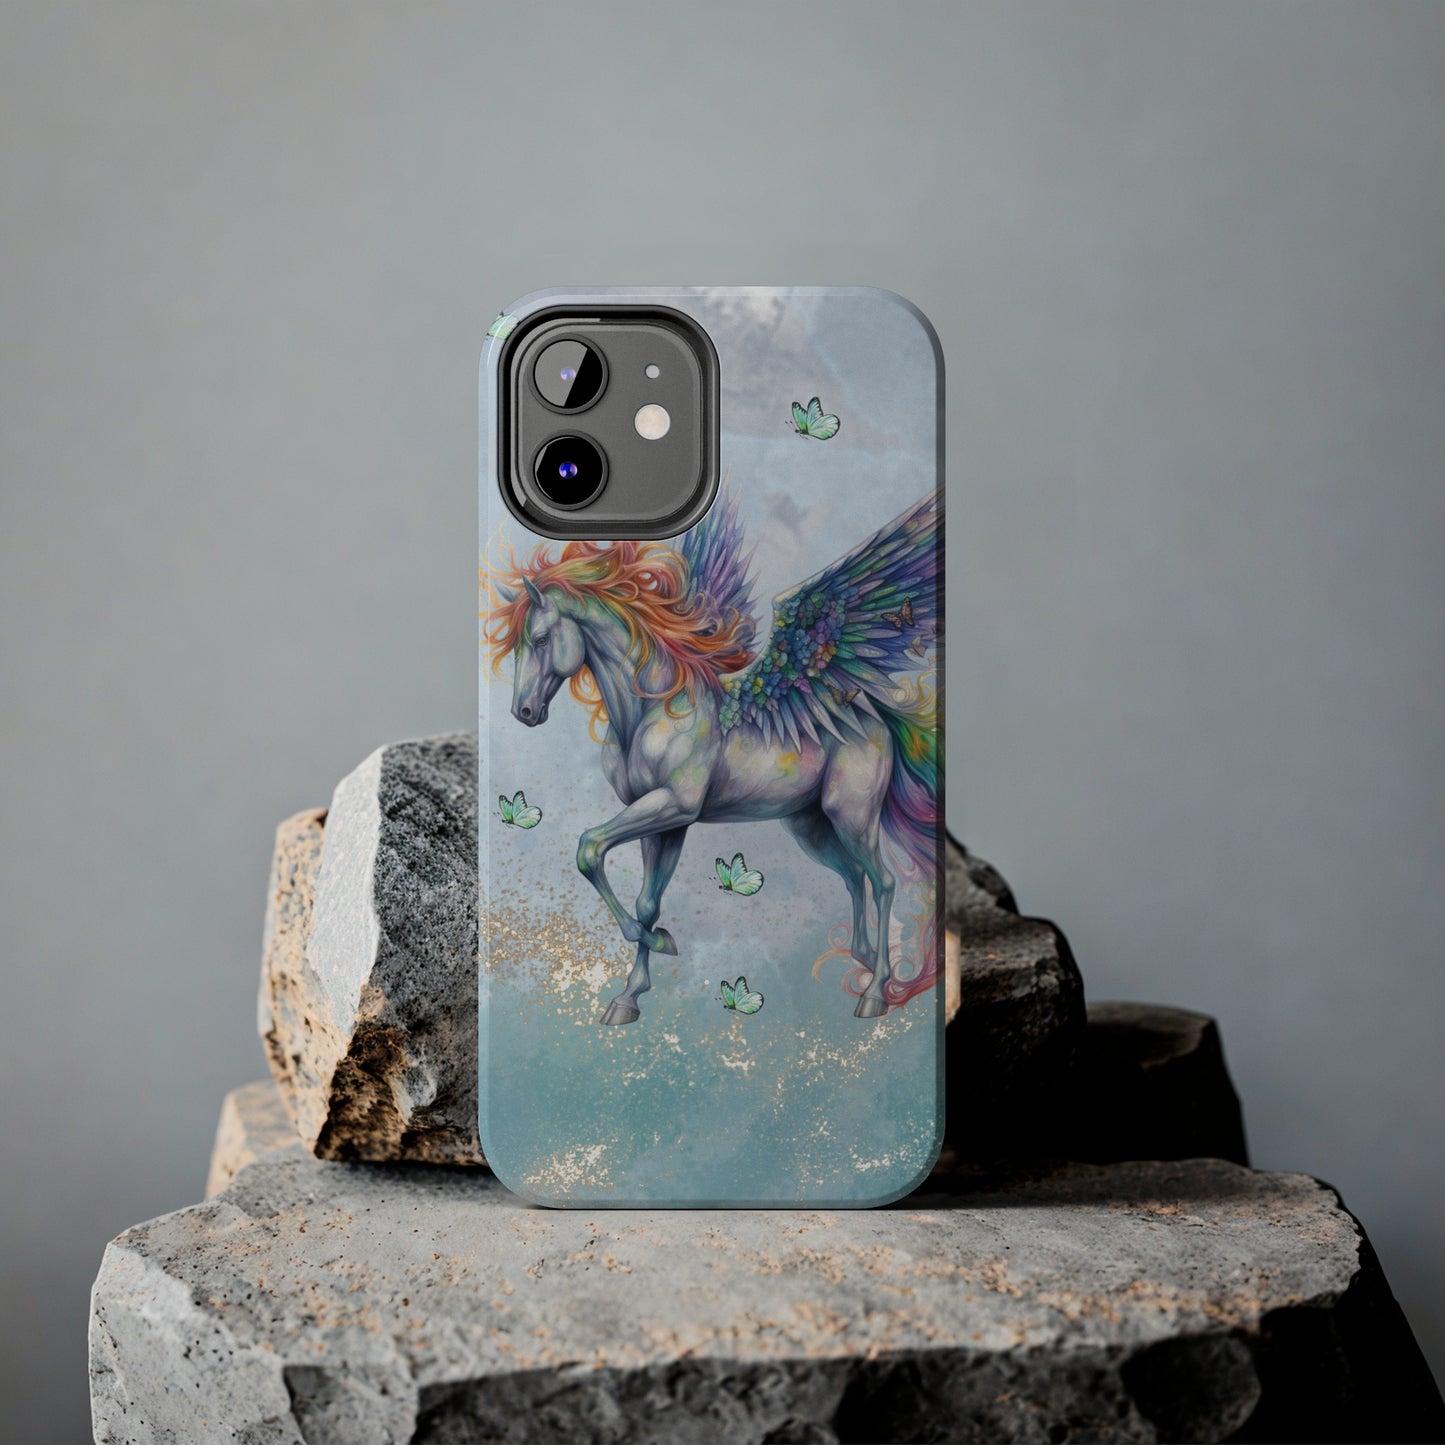 Mythical Unicorn: iPhone Tough Case Design - Wireless Charging - Superior Protection - Original Designs by TheGlassyLass.com